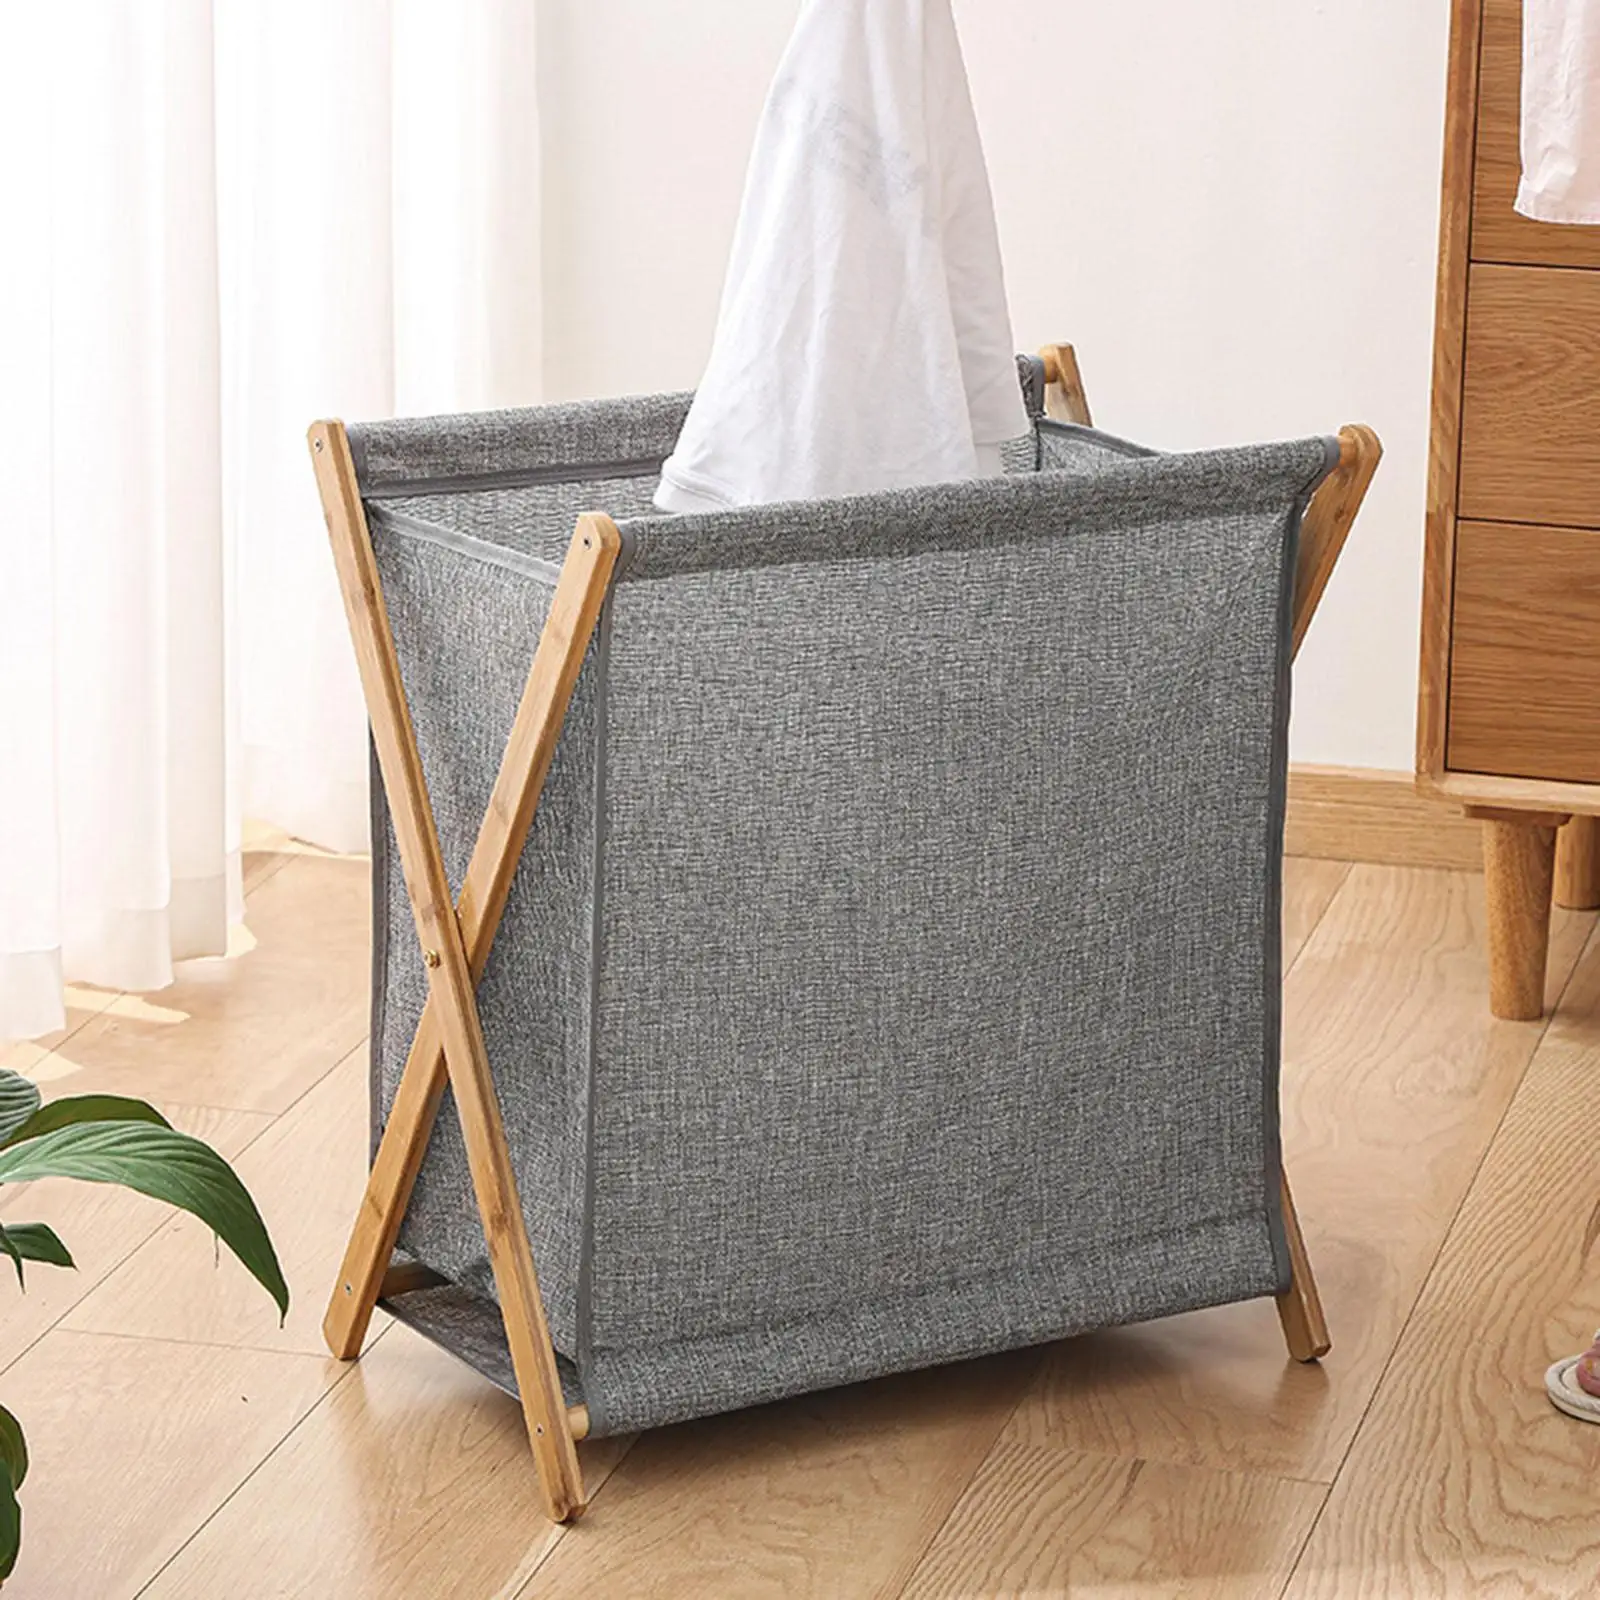 Collapsible x Frame Dirty Clothes Hamper Open Top Design Easy to Fold Move Durable Lightweight Daily Essential Functional